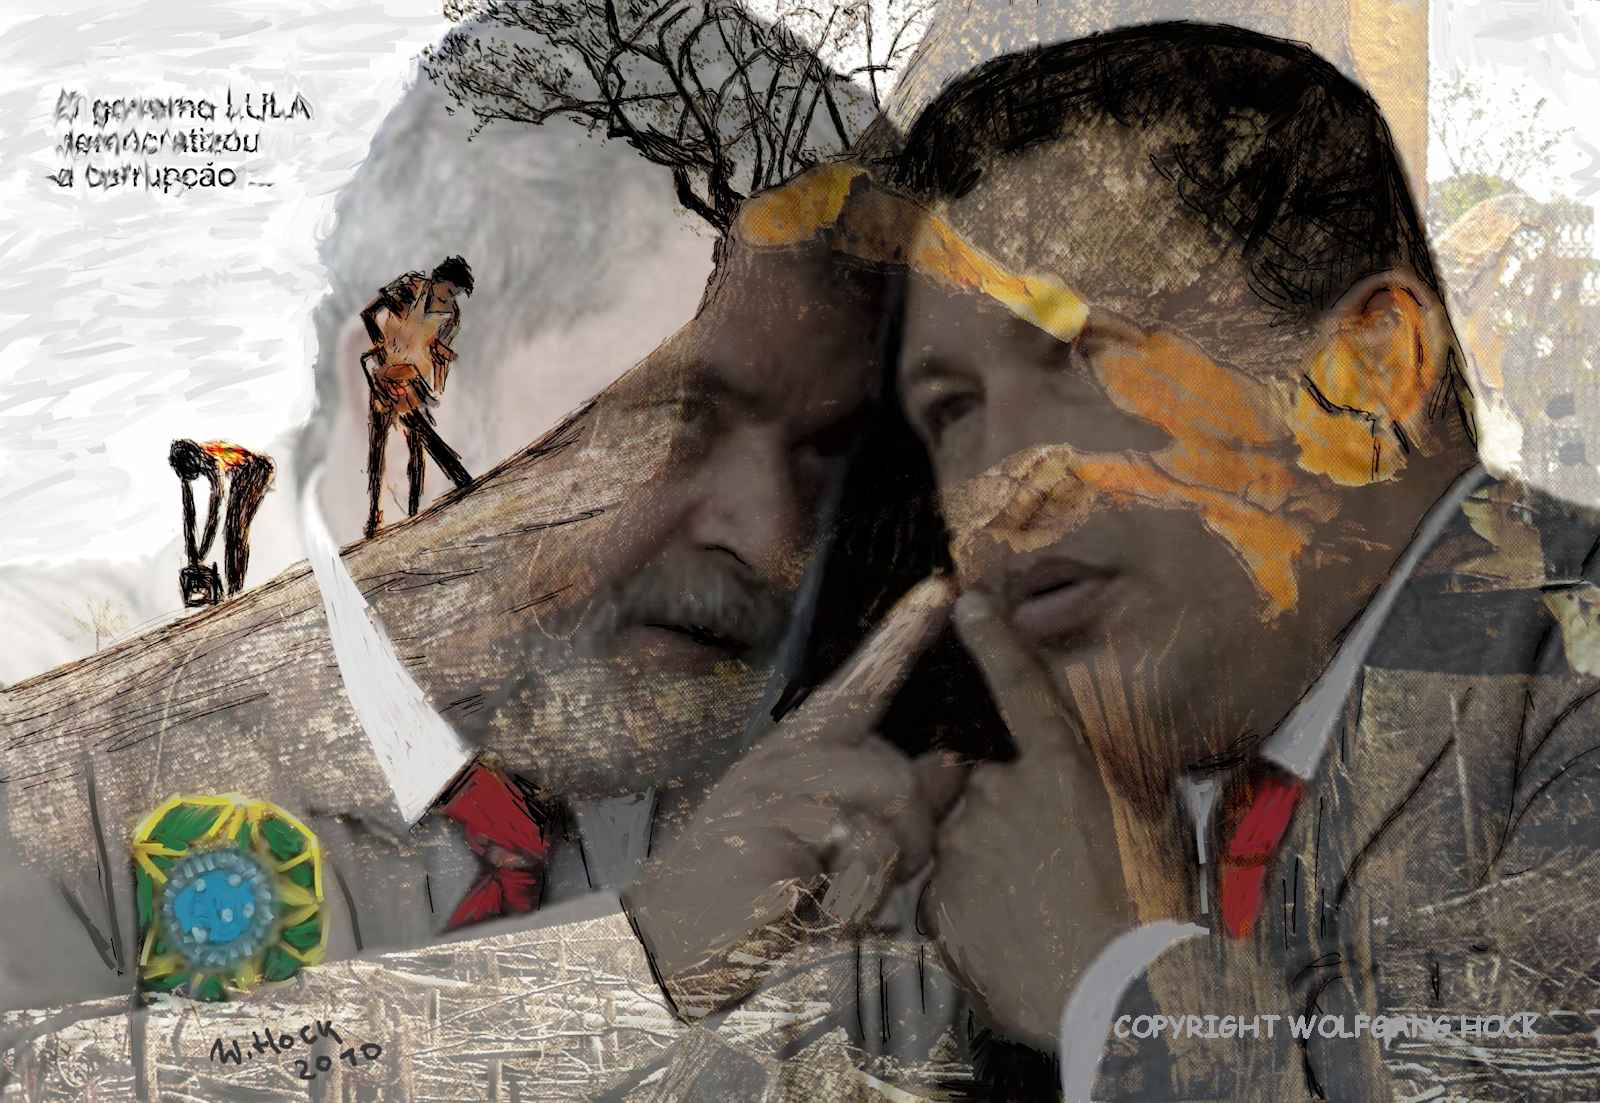 President Lula democratized corruption: Corruption for all 2010   Inkjet printed photo collage on photo -paper, edition of 5 87 x 60 cm (5 megapixel)